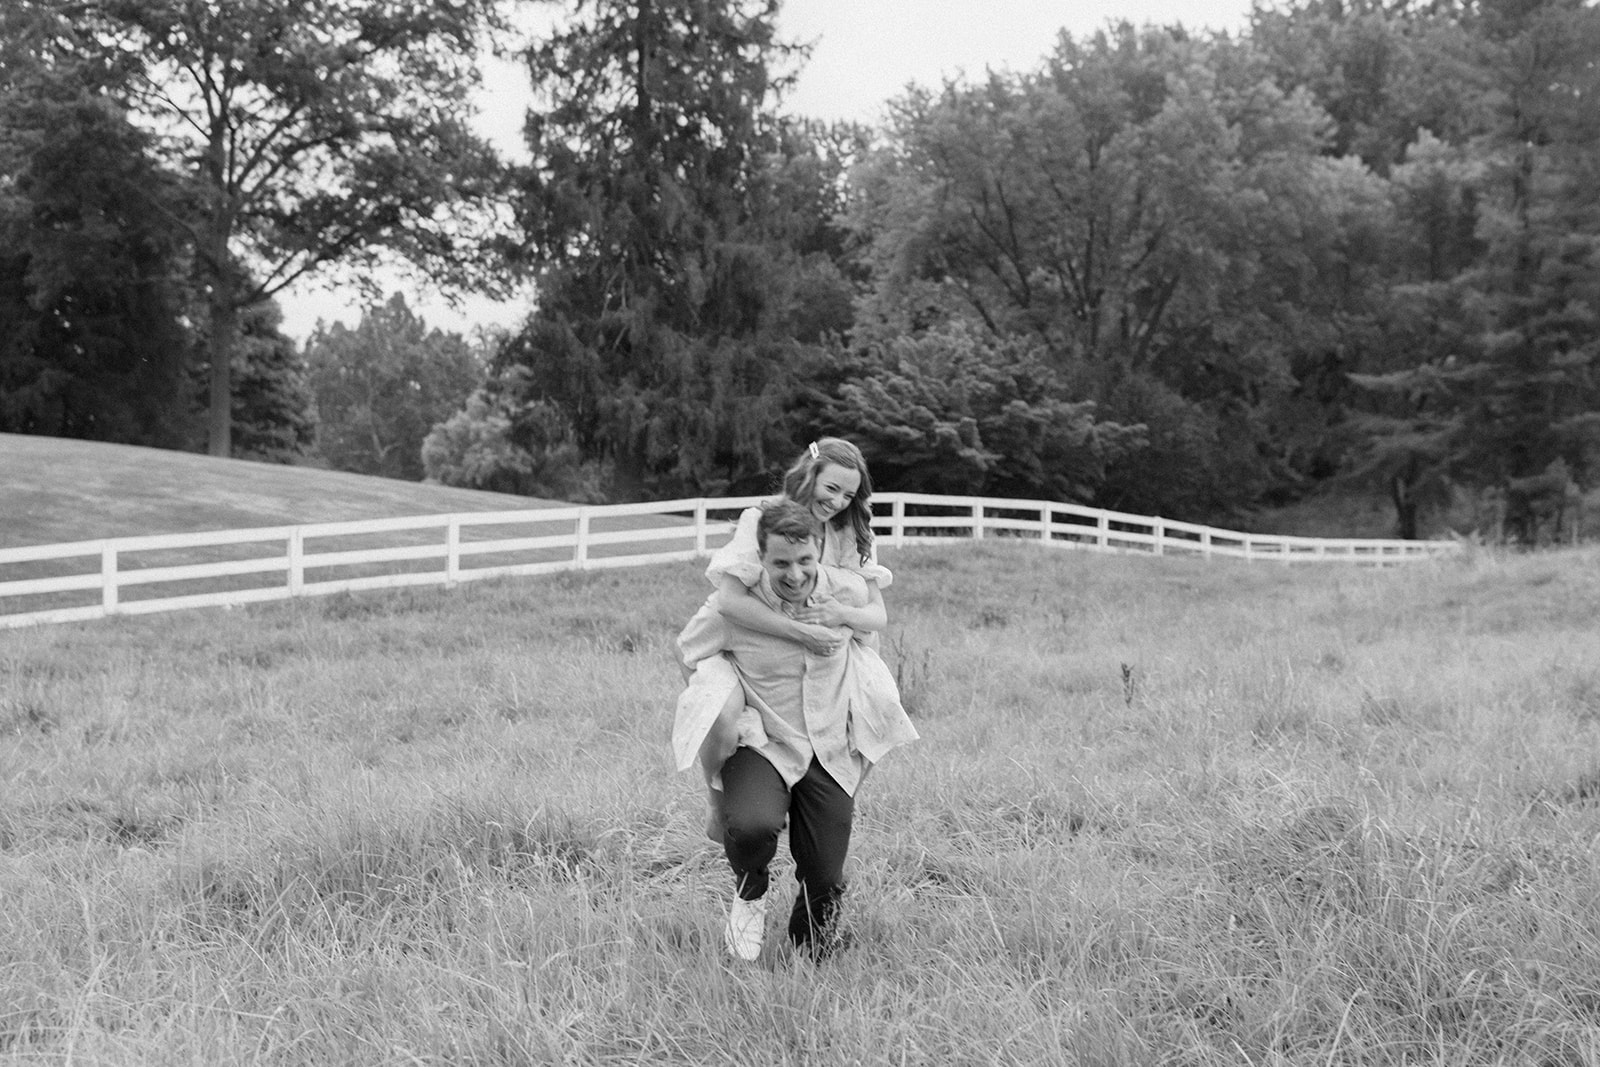 Engagement session piggy back ride through a field.